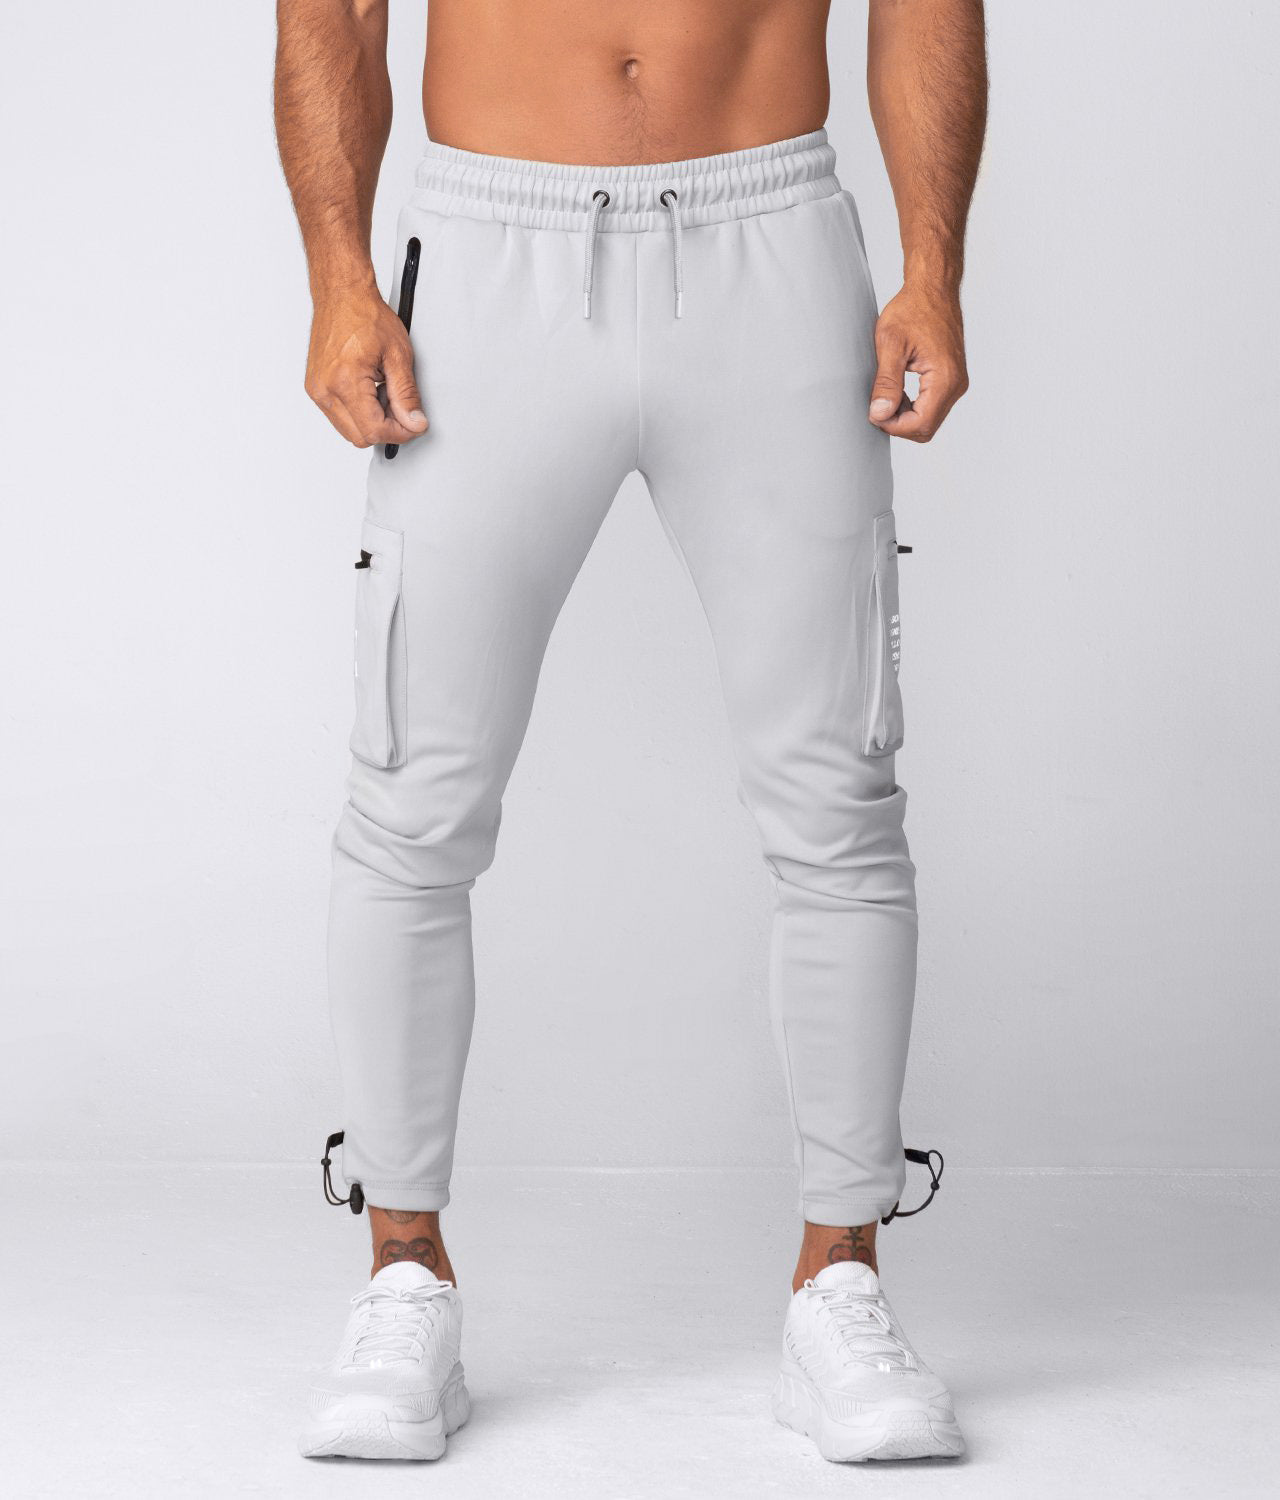 Weightlifting Workout Pants | Mens Bodybuilding Pants | Gym Wear